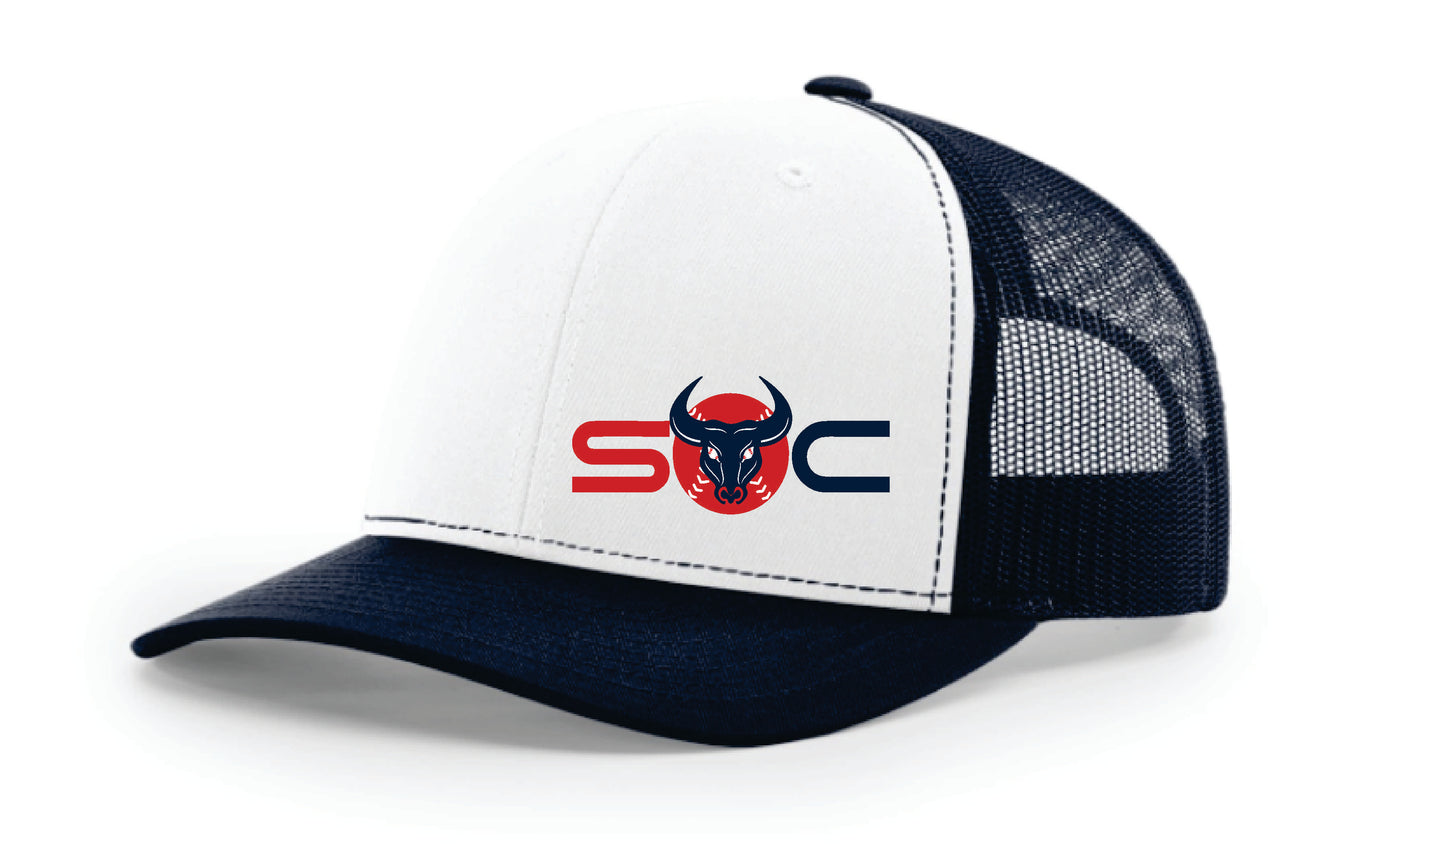 SC Trucker Hat - Snapback w/ offset logo 2 color options available